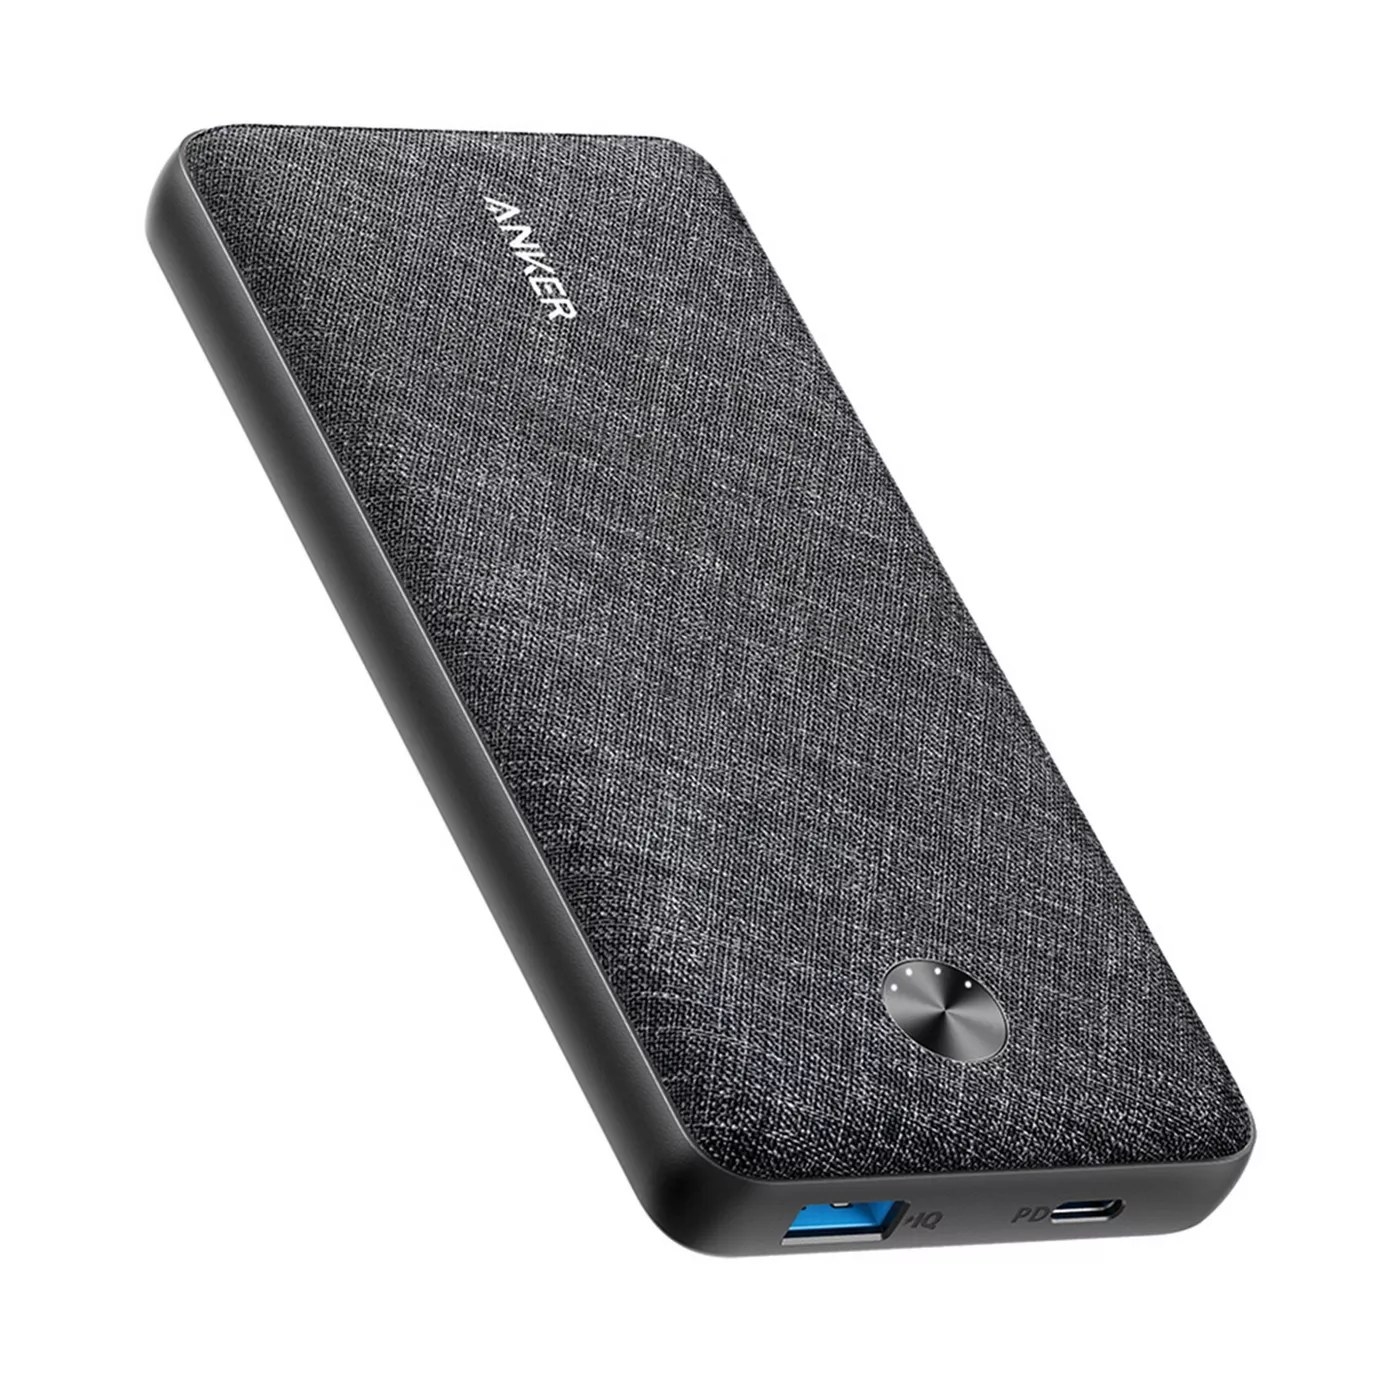 The grey power bank says Anker with a heathered fabric front